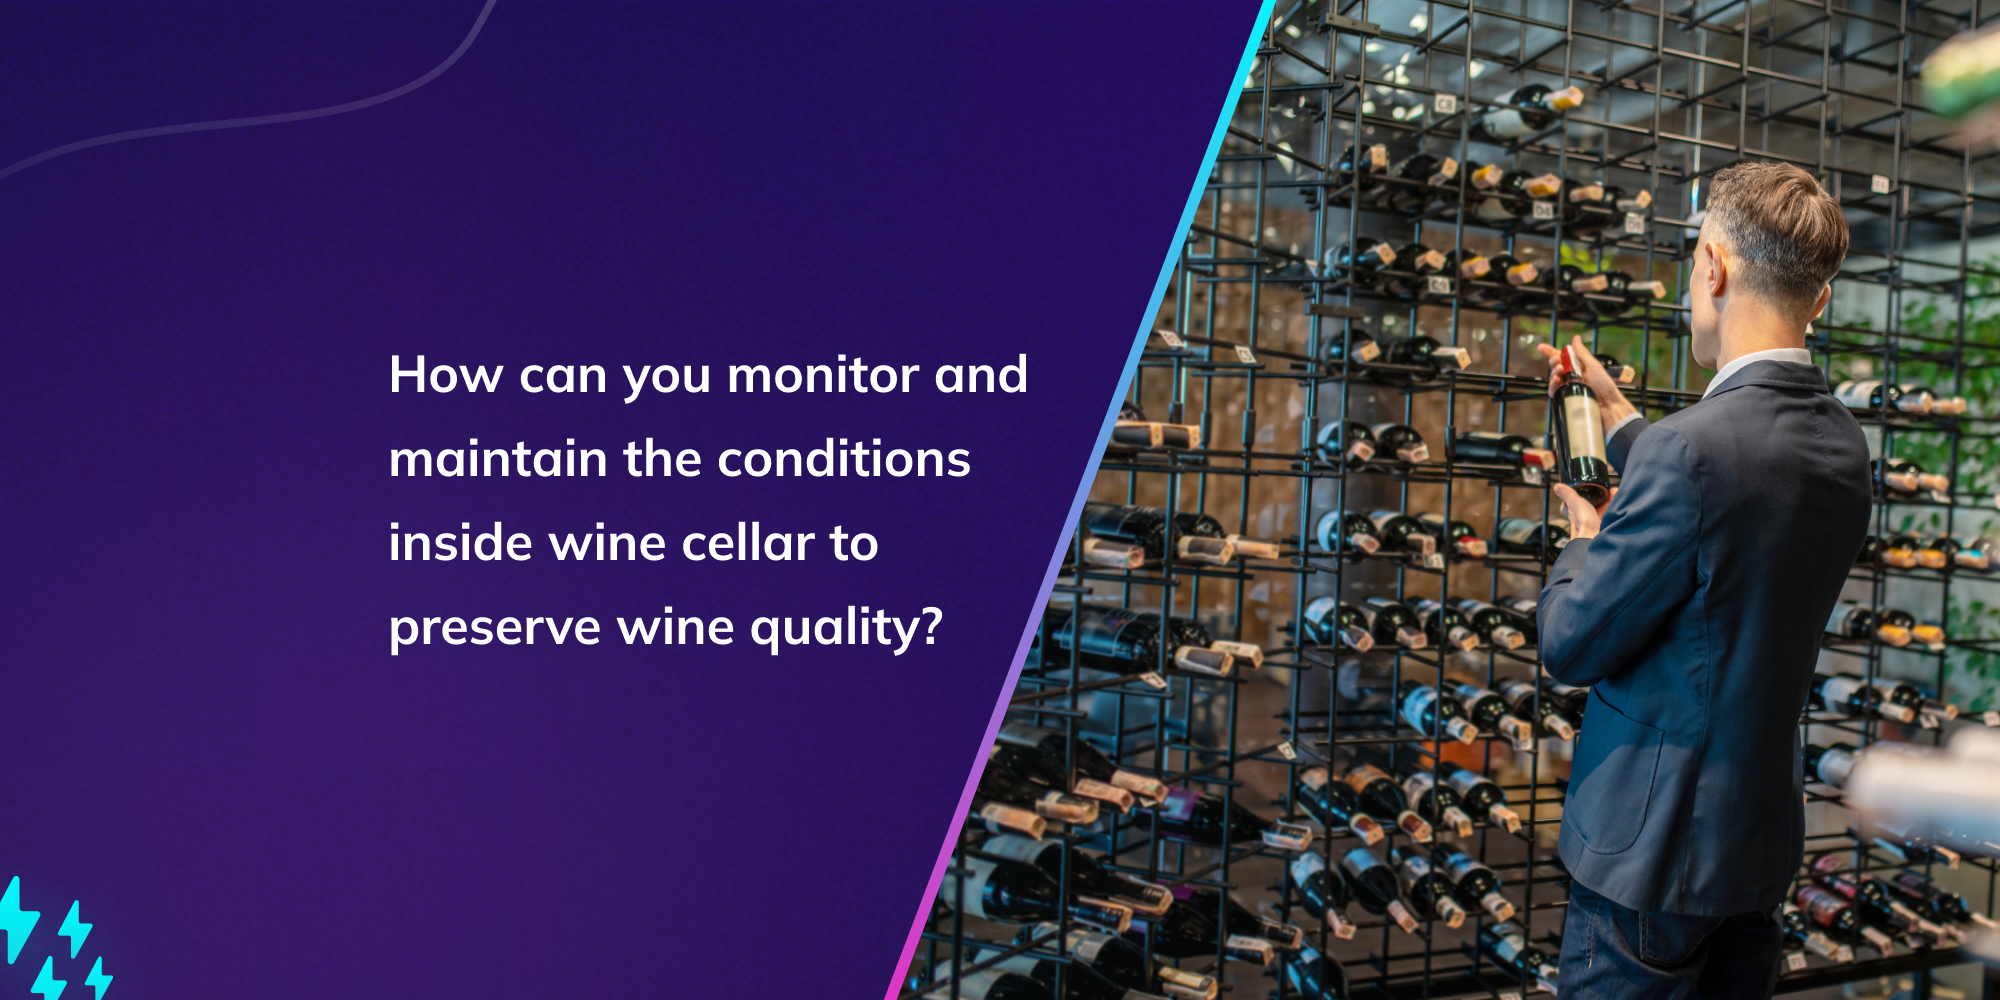 How can you monitor and maintain the conditions inside wine cellar to preserve wine quality?